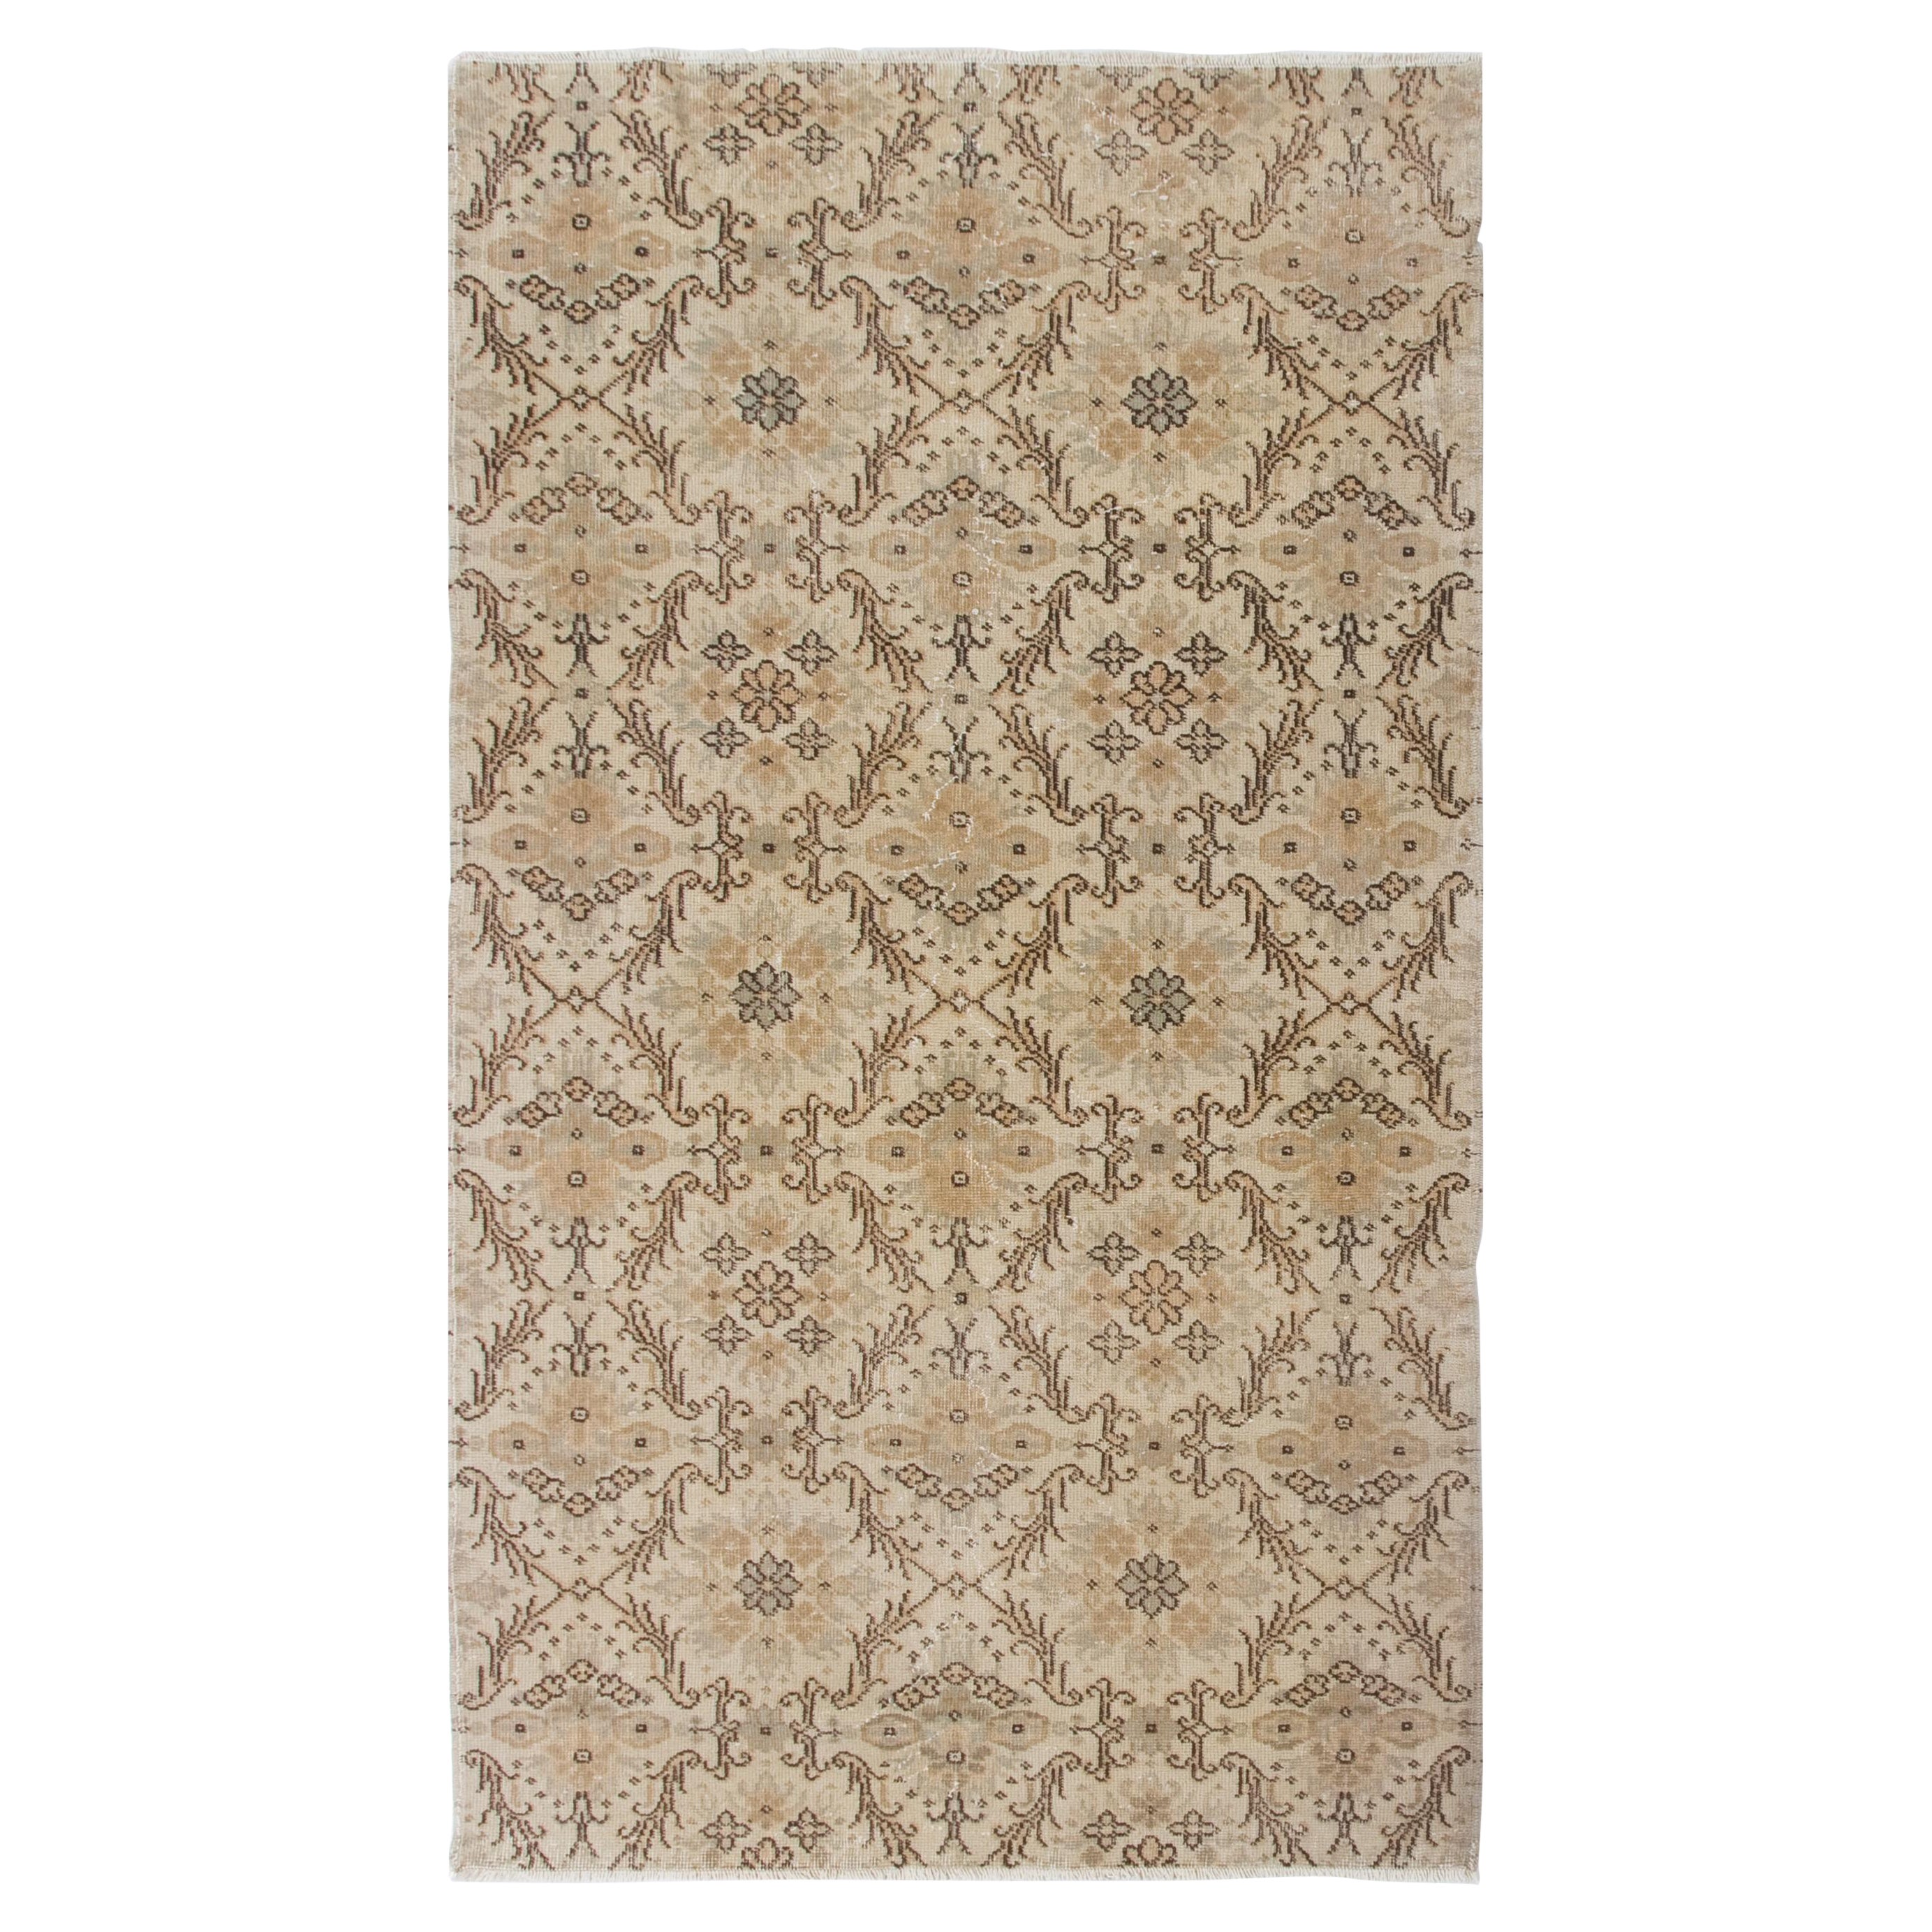 4.2x7.5 ft Decorative Vintage Handmade Anatolian Accent Rug with Floral Design